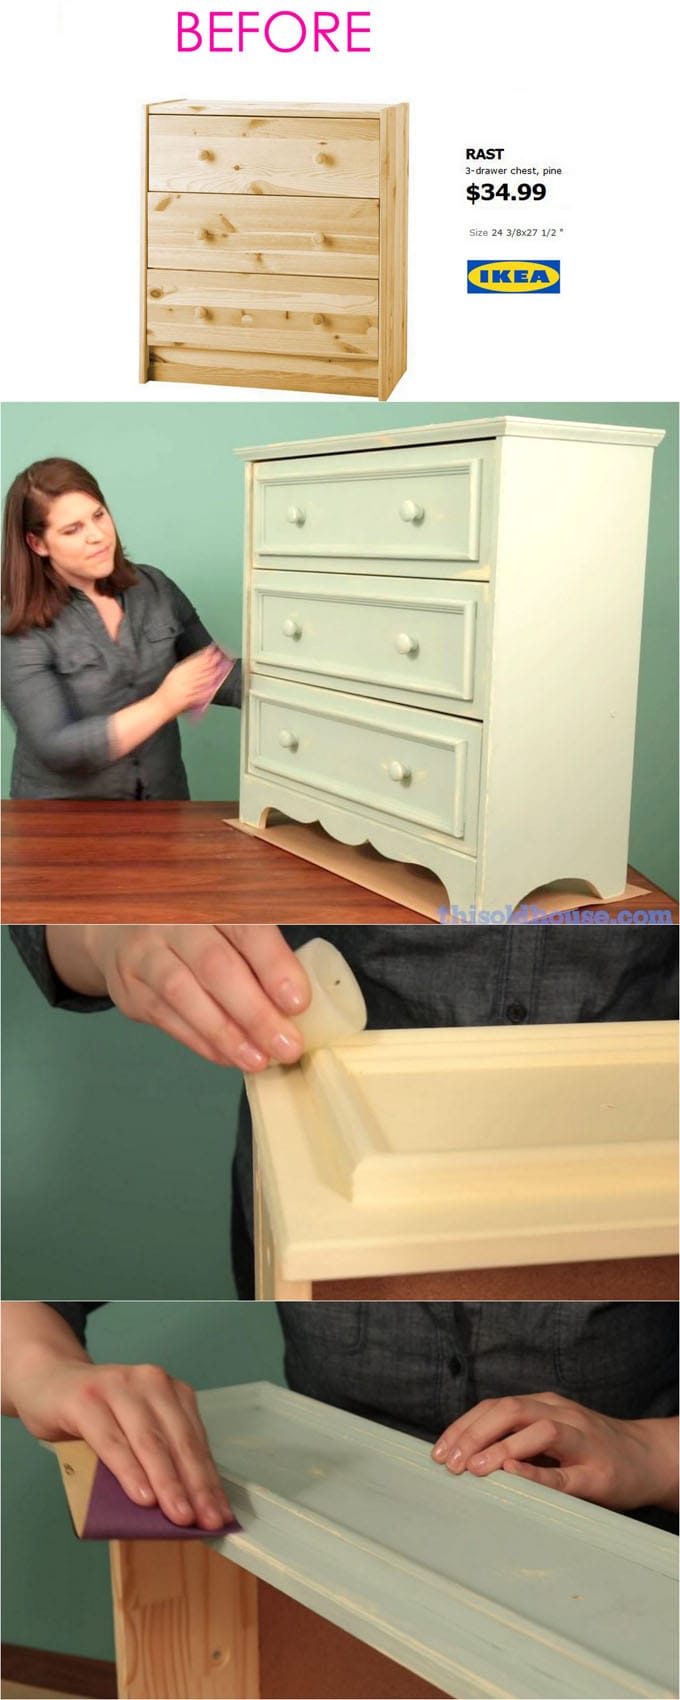 DIY door stopper you can easily make from this one IKEA item - IKEA Hackers